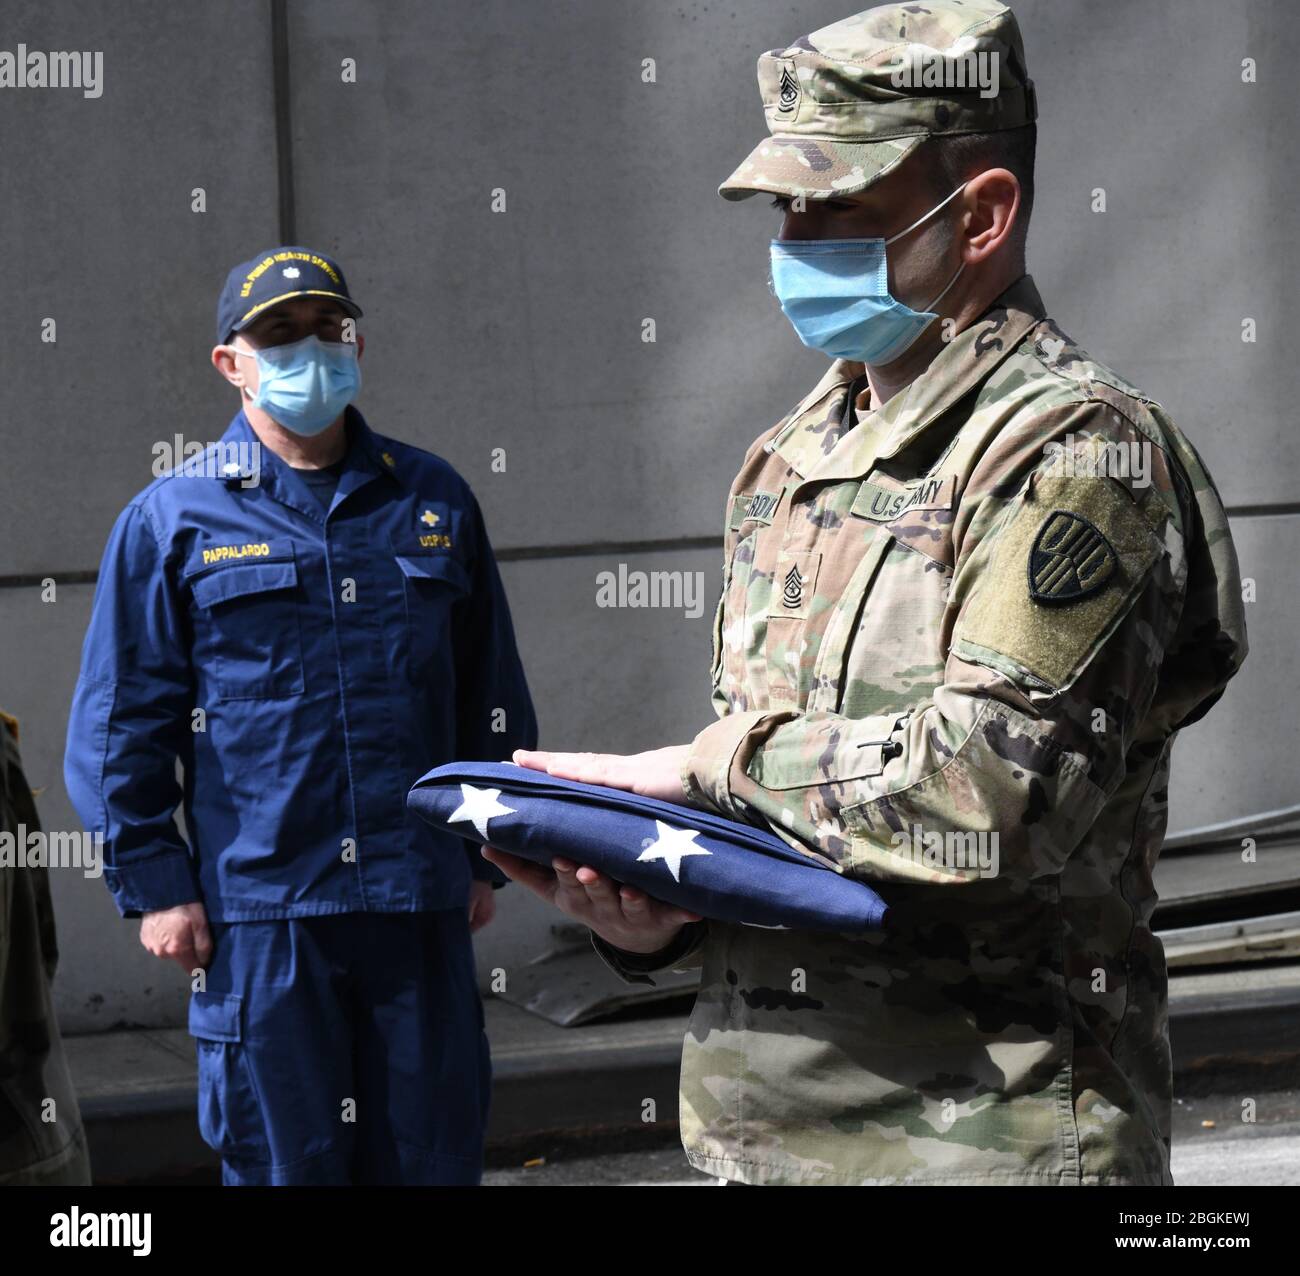 New York Army National Guard Sgt. Major Nicholas Pardi, a member of the 104th Military Police Battalion, presents an American flag during a memorial service for a  veteran who died of COVID 19 while a patient at the Javits New York Medical Station erected at the  Jacob Javits Convention Center in New York City, on on April 19, 2020. Active military and members of the New York National Guard Military, along with staffers who are prior service military, rendered final honors as his remains were transferred ( U.S. Air National Guard photo by Major Patrick Cordova) Stock Photo